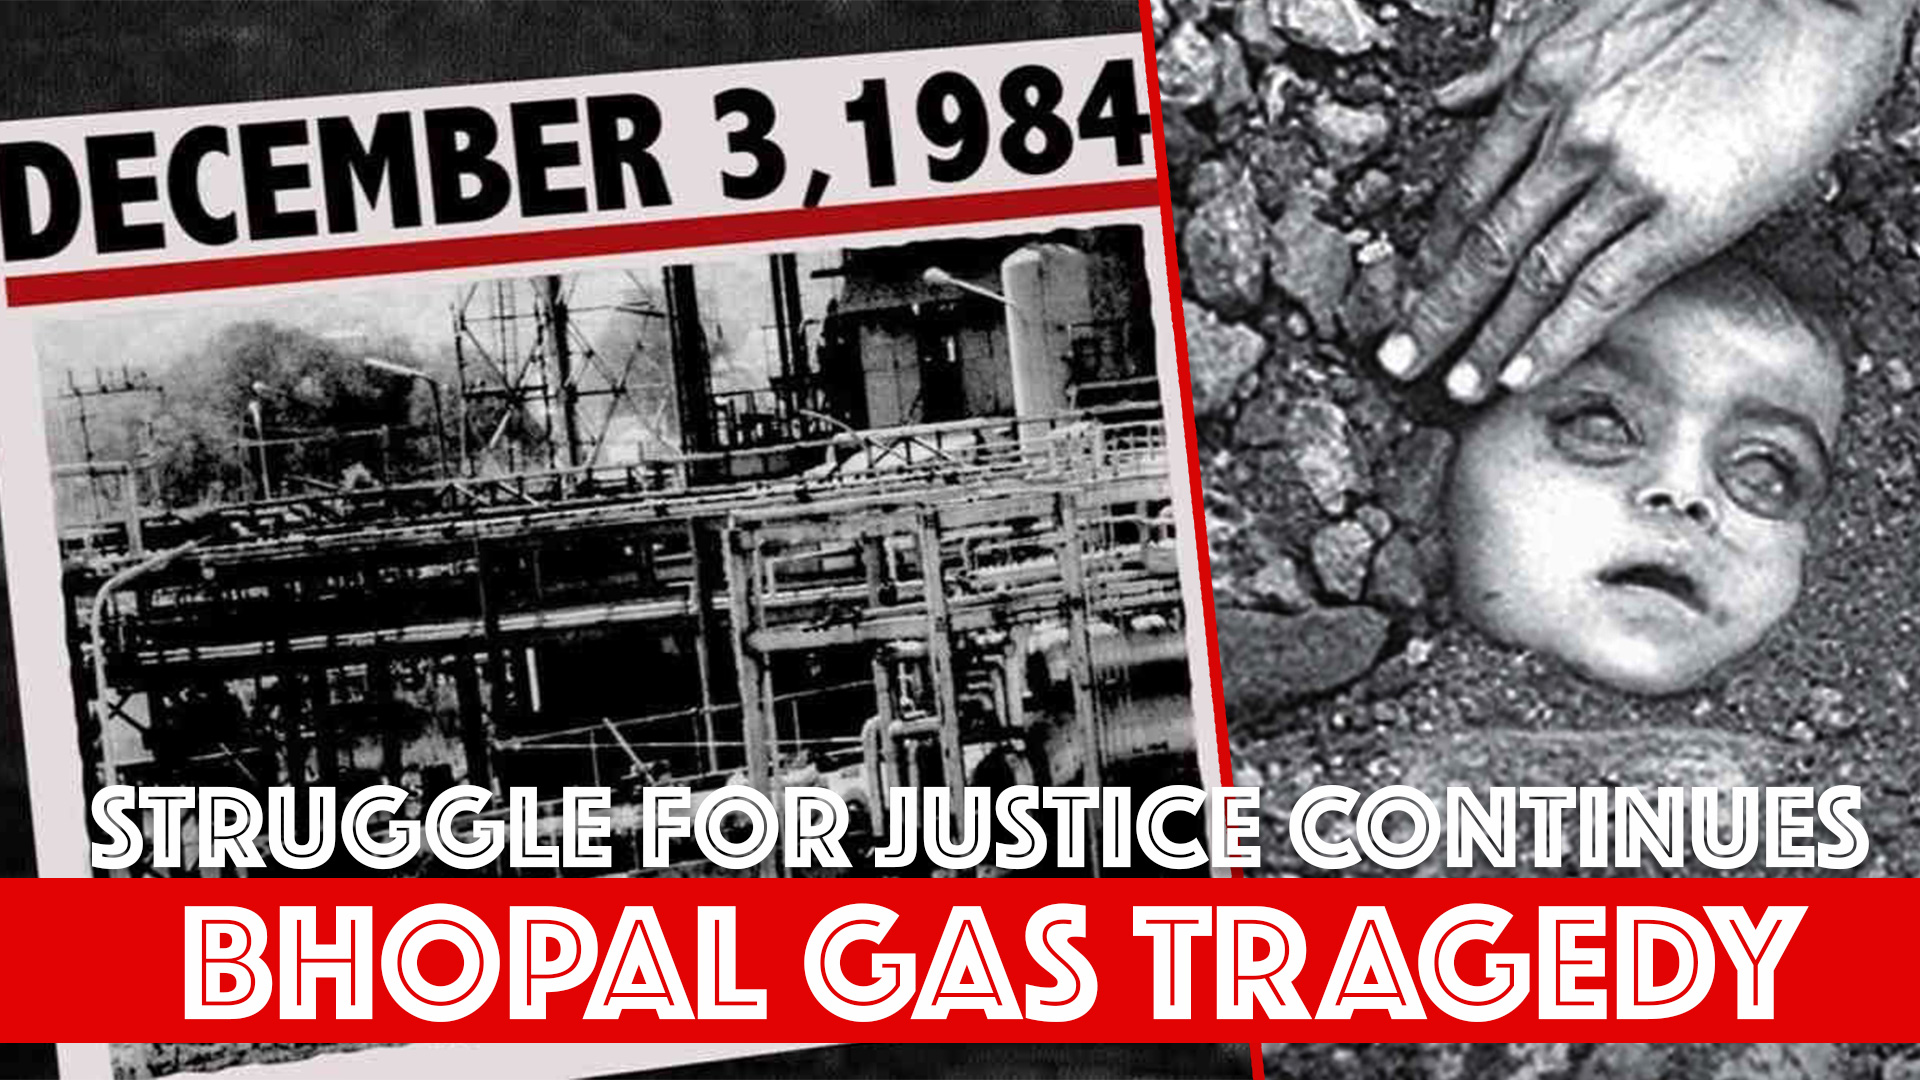 Bhopal Gas Tragedy_The struggle for justice continues